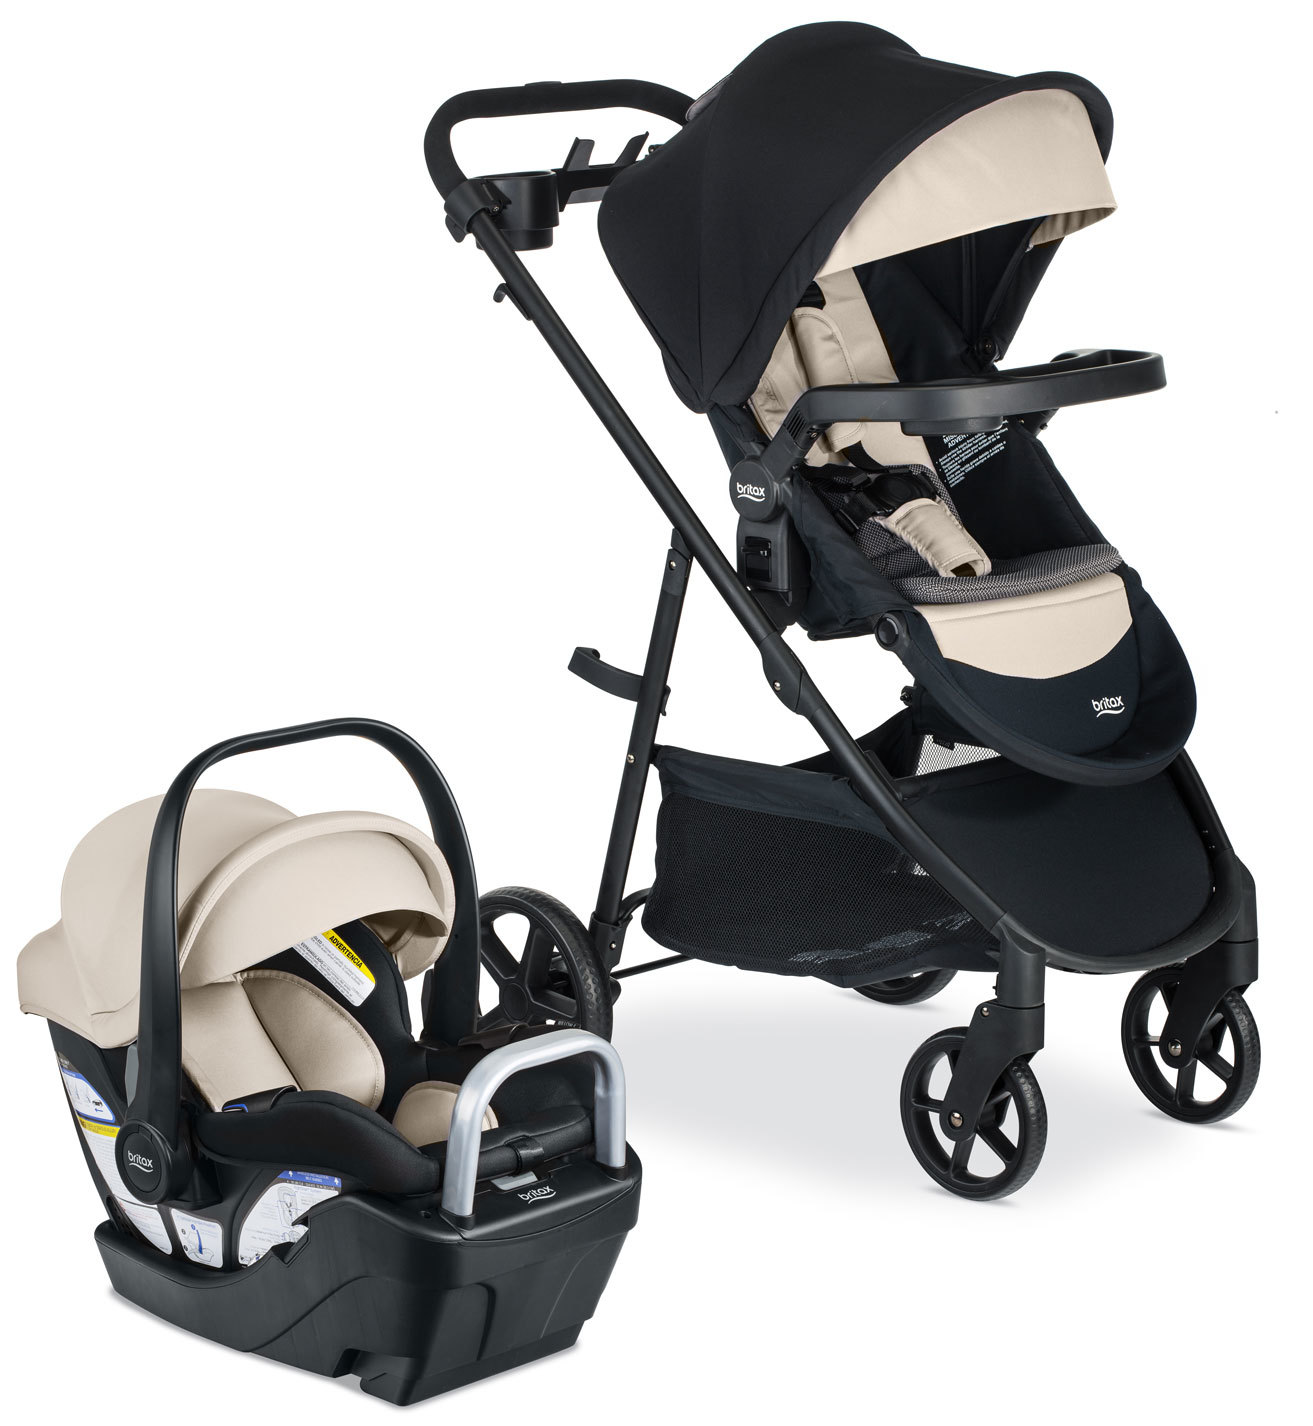 Willow Brook S+ Travel System in Sand Onyx fashion